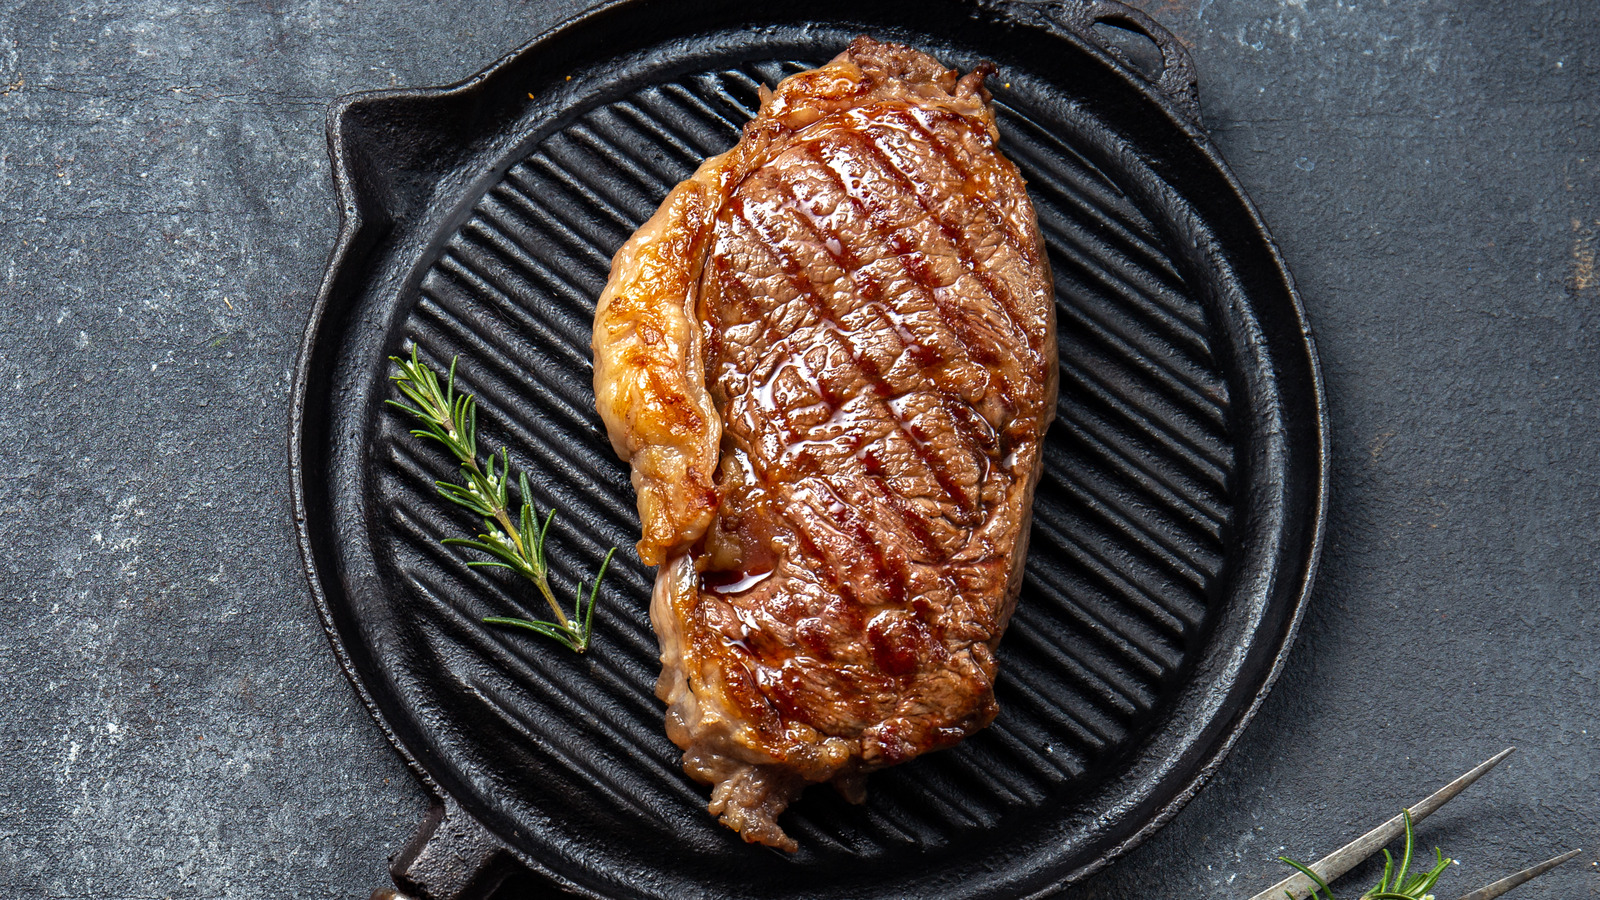 https://www.thedailymeal.com/img/gallery/common-myths-about-cooking-steak-you-need-to-know/l-intro-1664285731.jpg